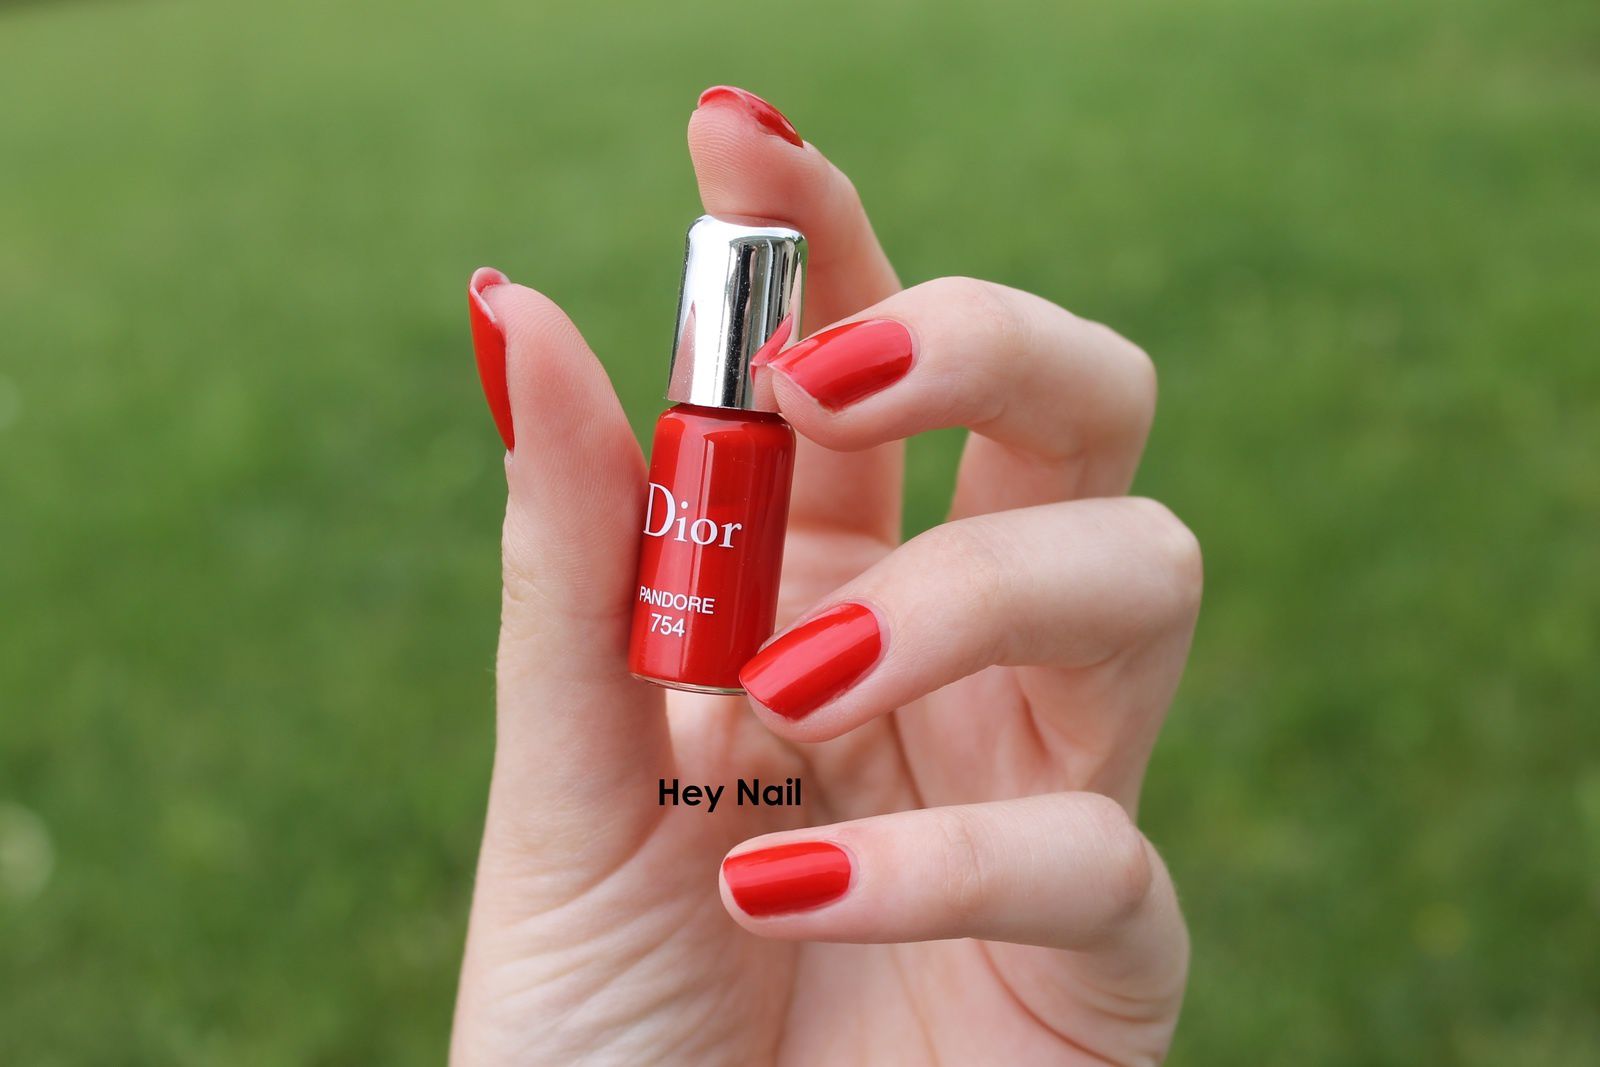 Dior - Pandore n°754 - Hey Nail - Ongles & Maquillages